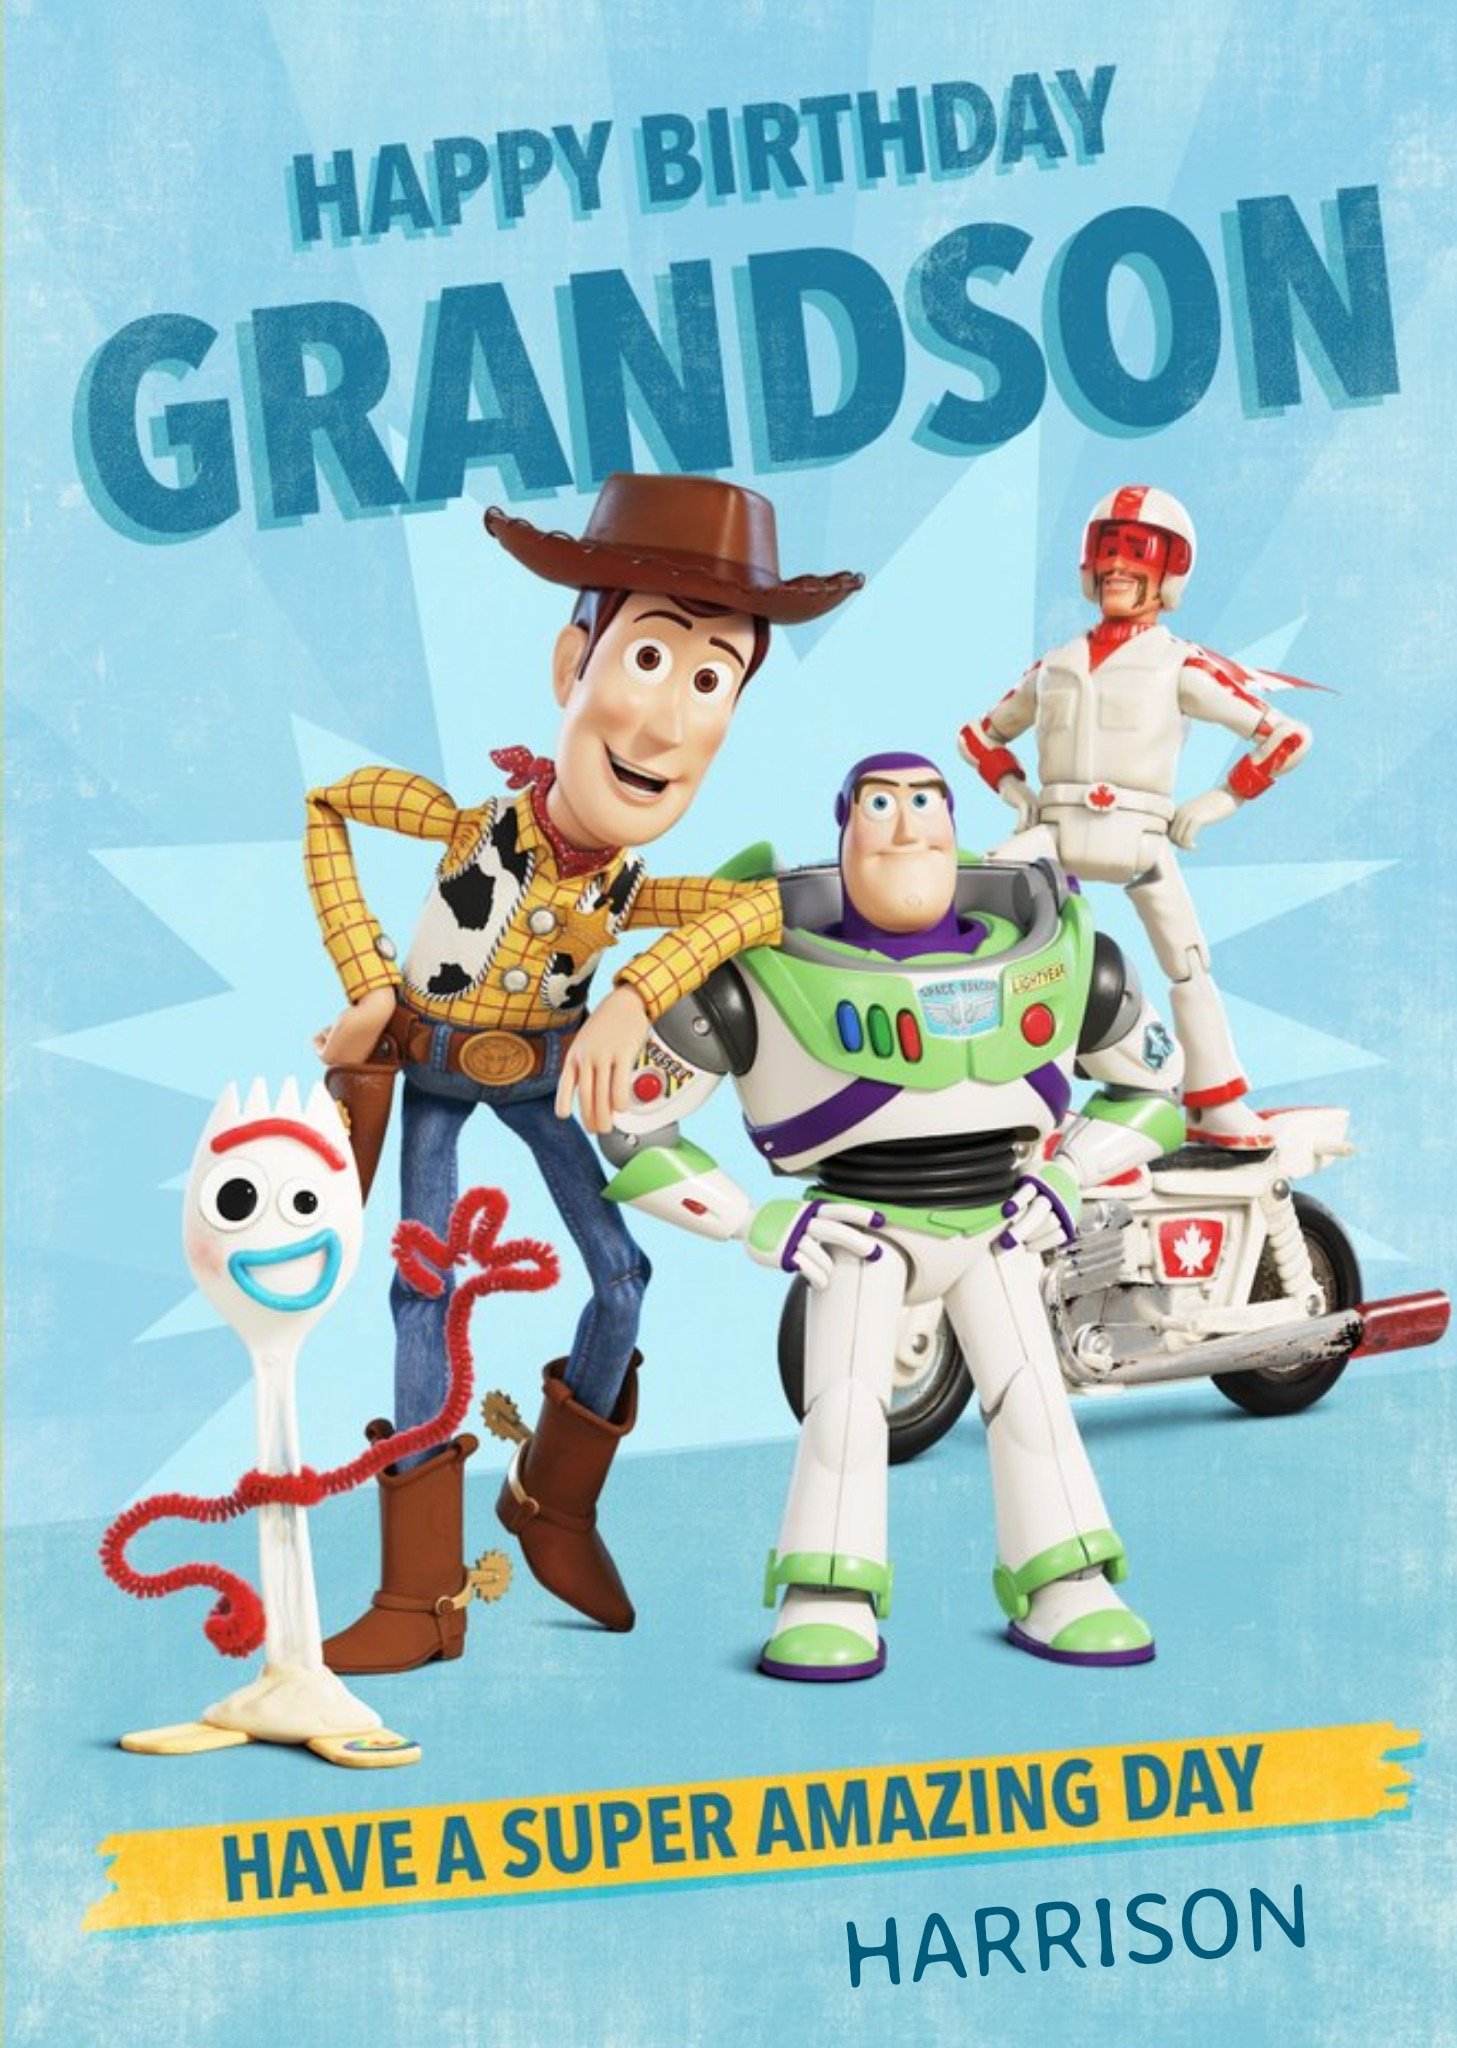 Toy Story 4 - Happy Birthday Grandson Super Amazing Day, Large Card